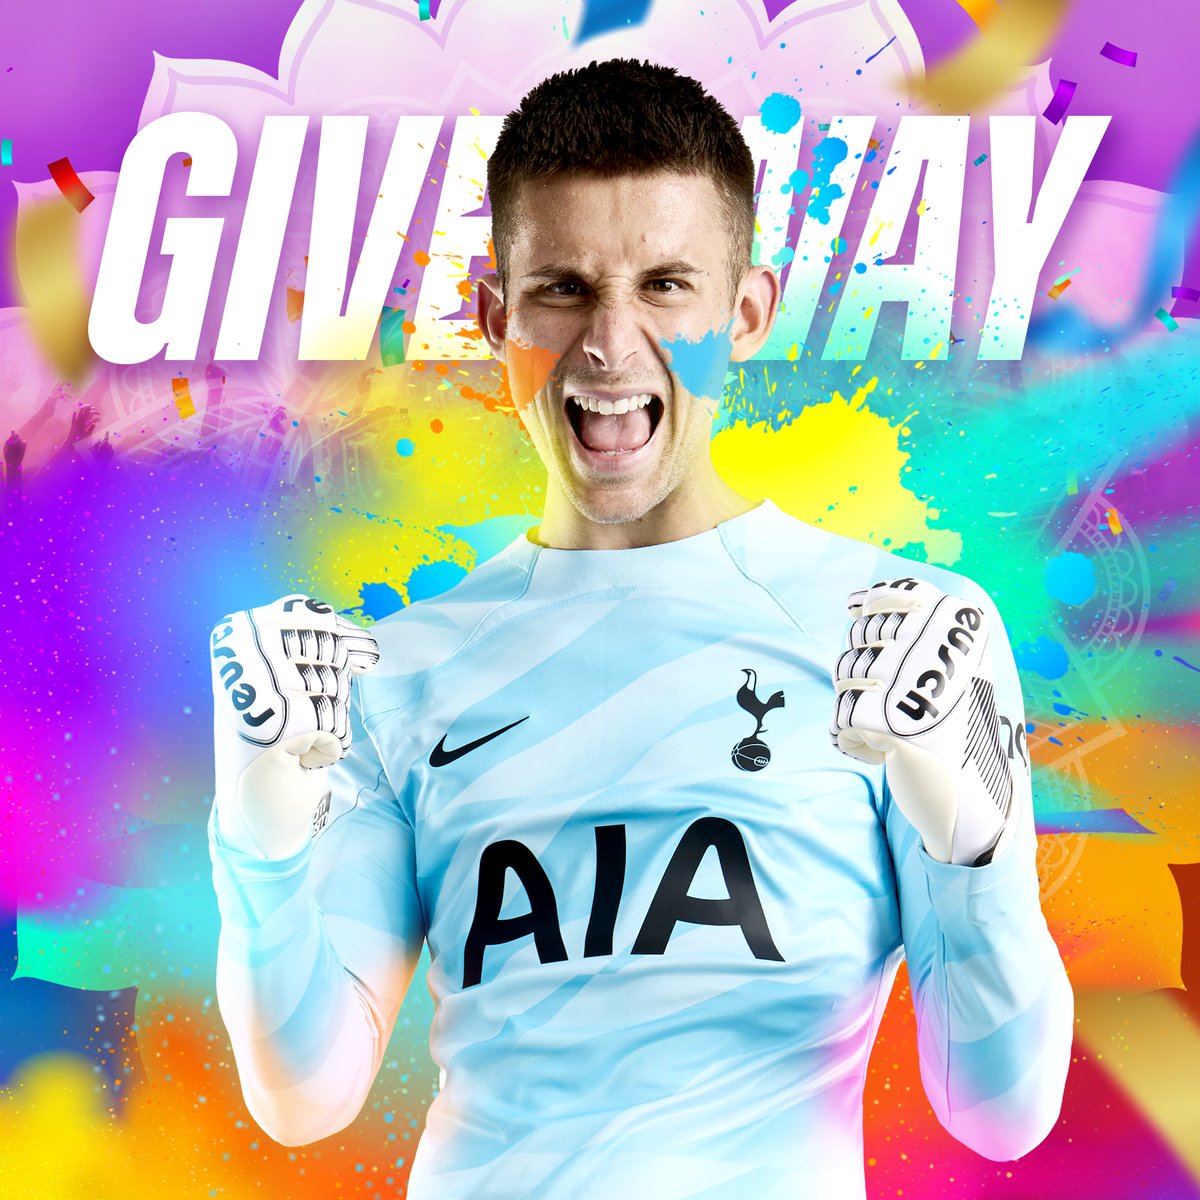 GIVEAWAY! 🚨 Get your Holi gift 🎁 An official Spurs jersey, signed by Vicario 😍 To stand a chance, all you need to do is follow us and RT this tweet 🙌 #HoliWithSpurs